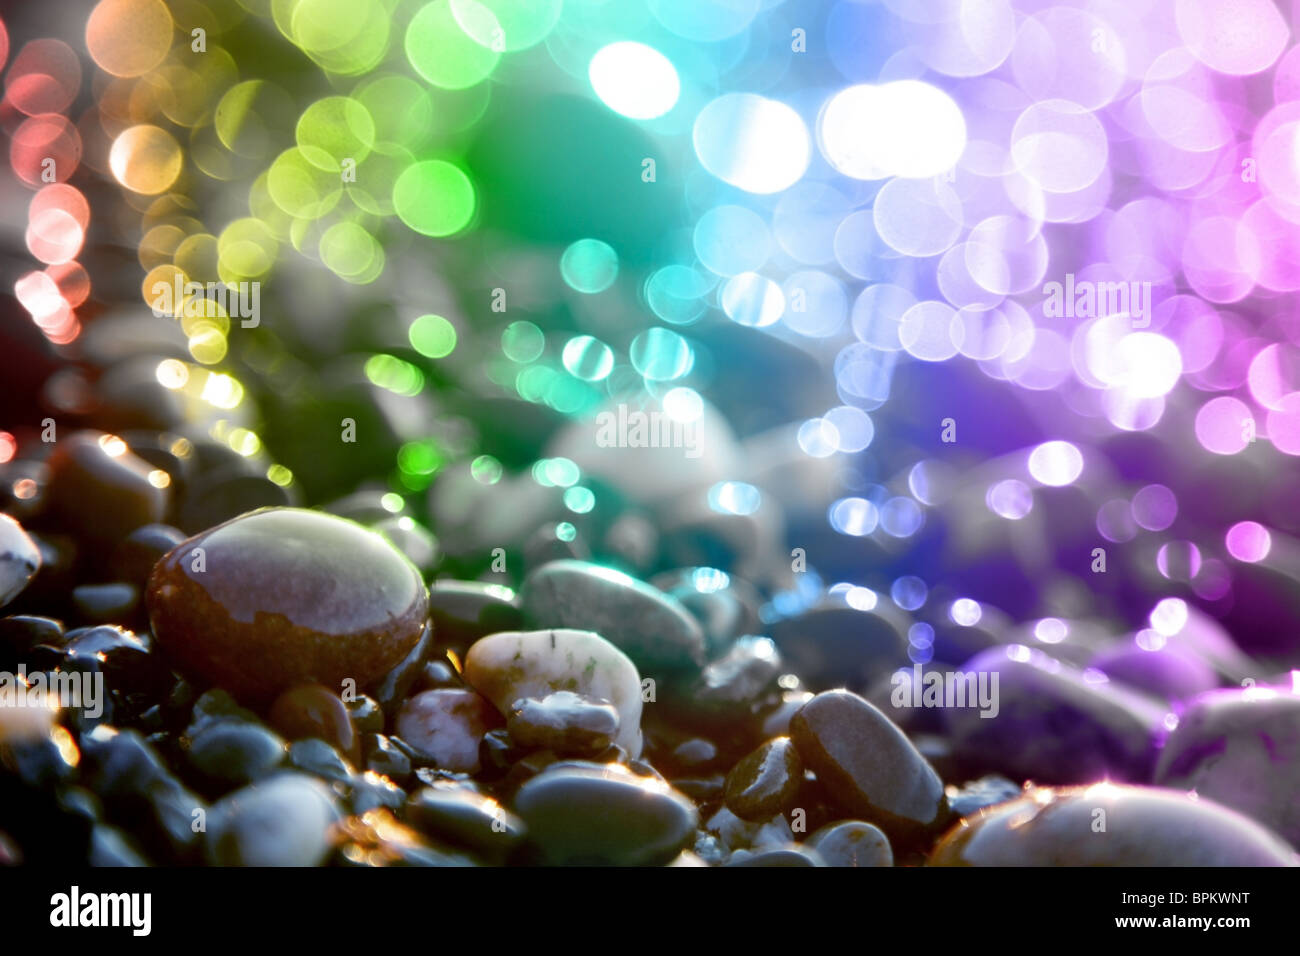 Background colored circles and marine stones. Stock Photo